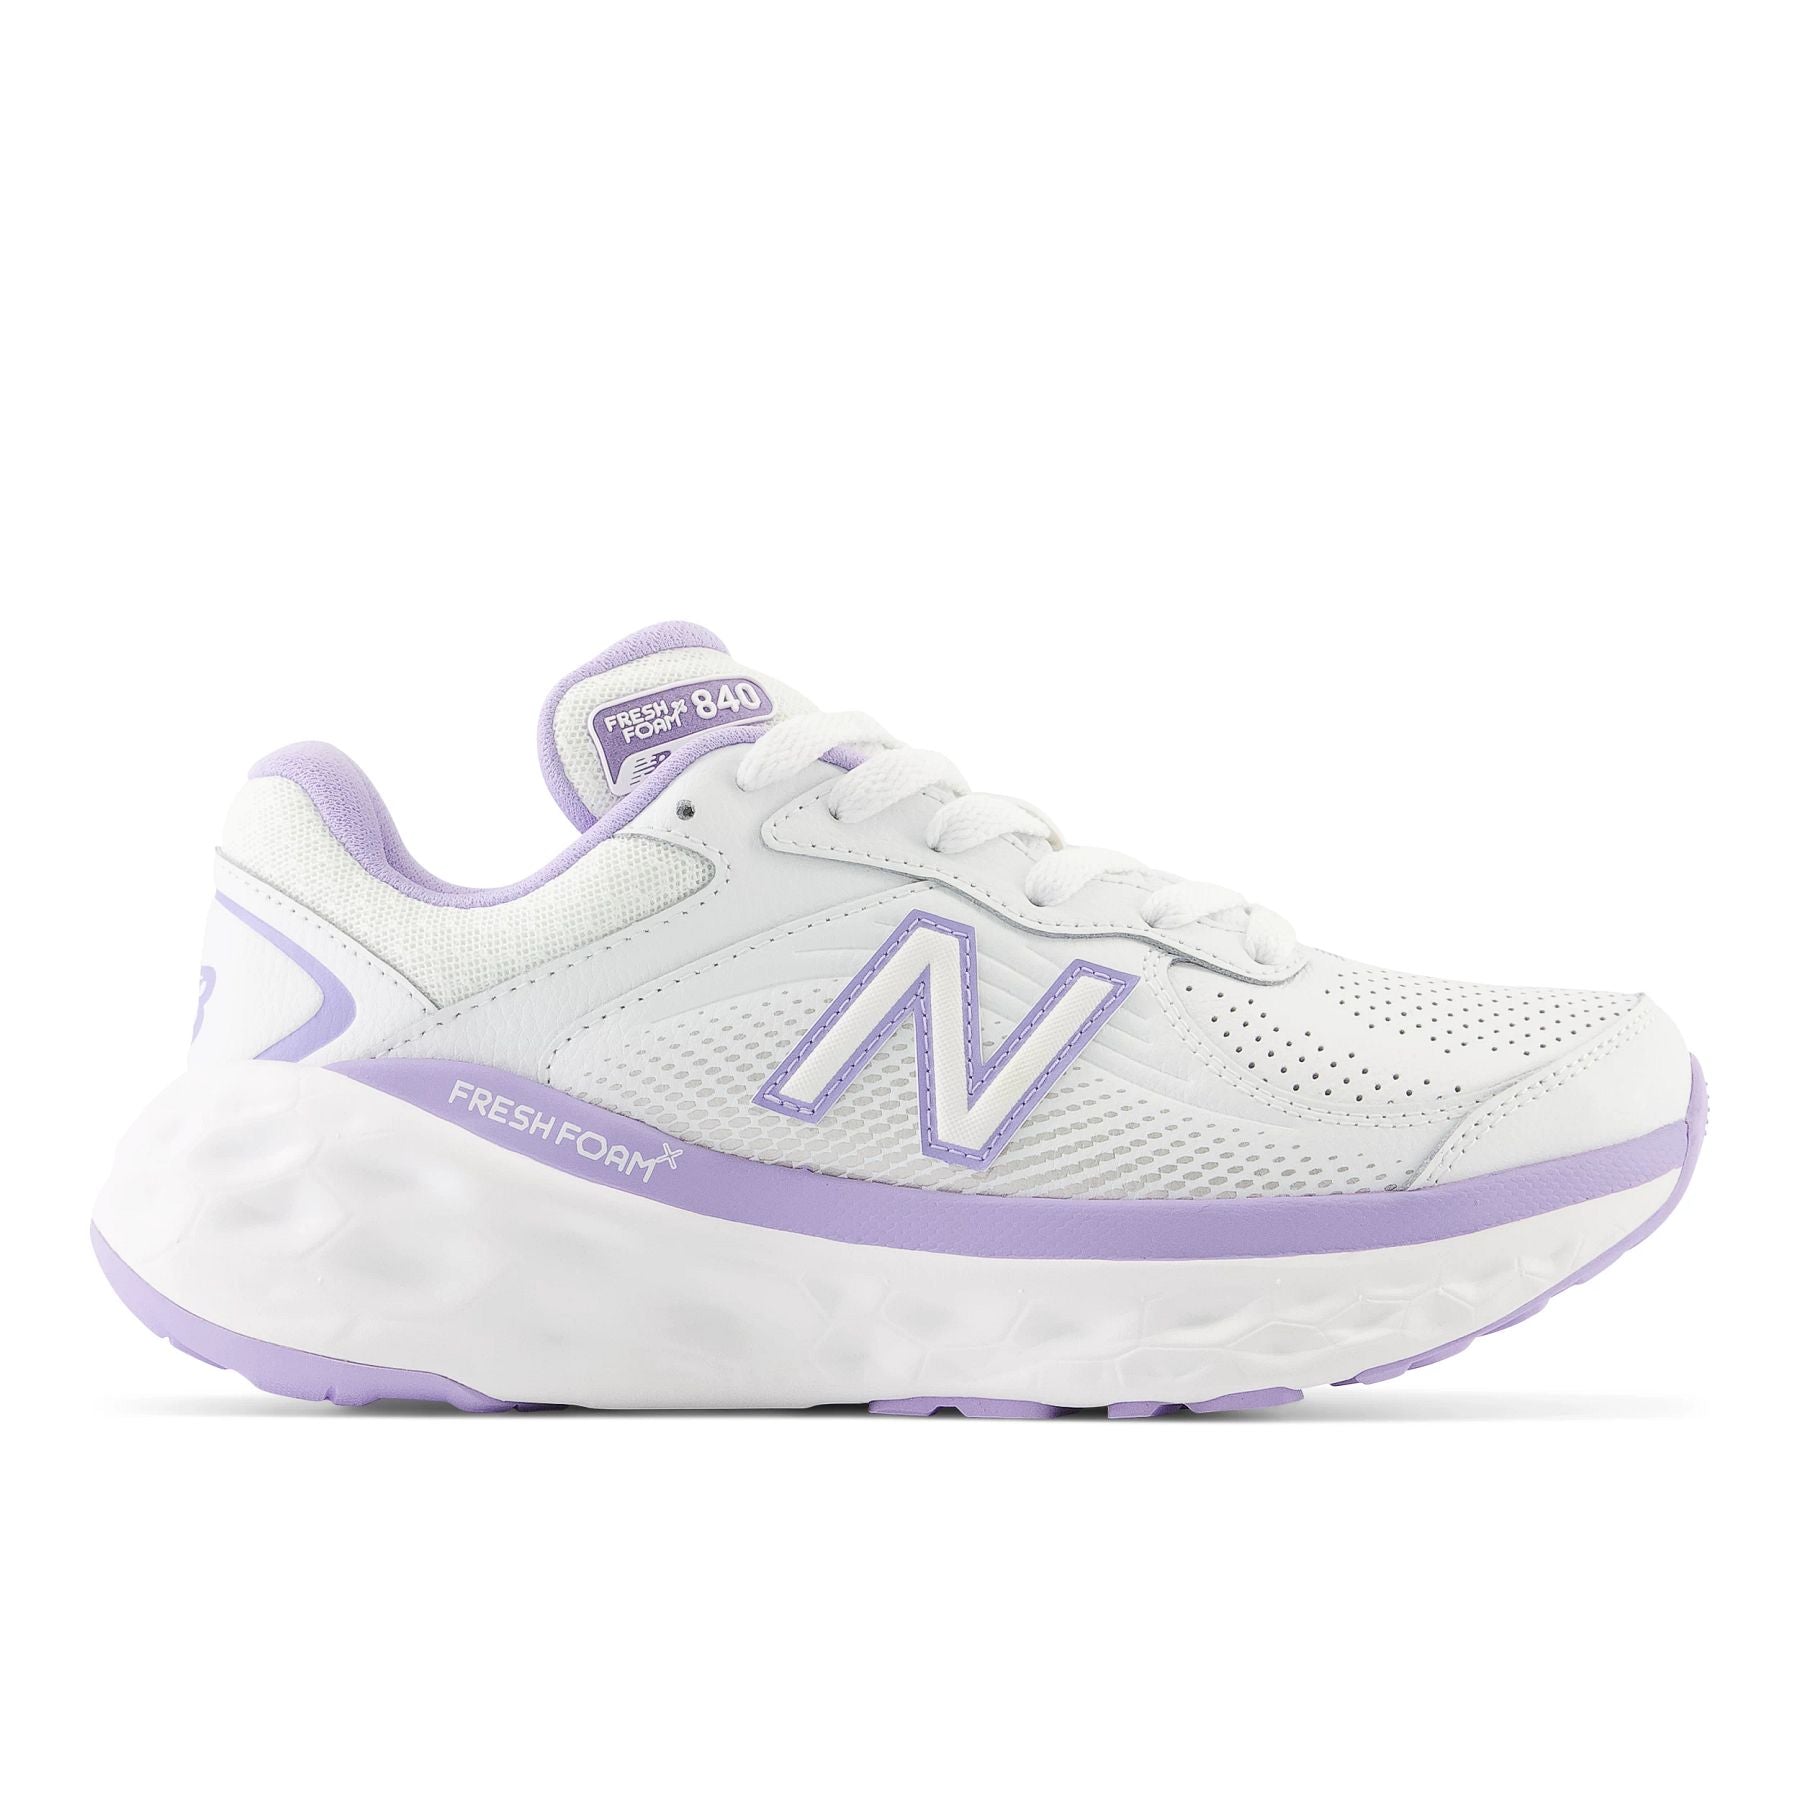 Lateral view of the Women's leather walking shoe WW840 V1 by New Balance in White/Light Purple